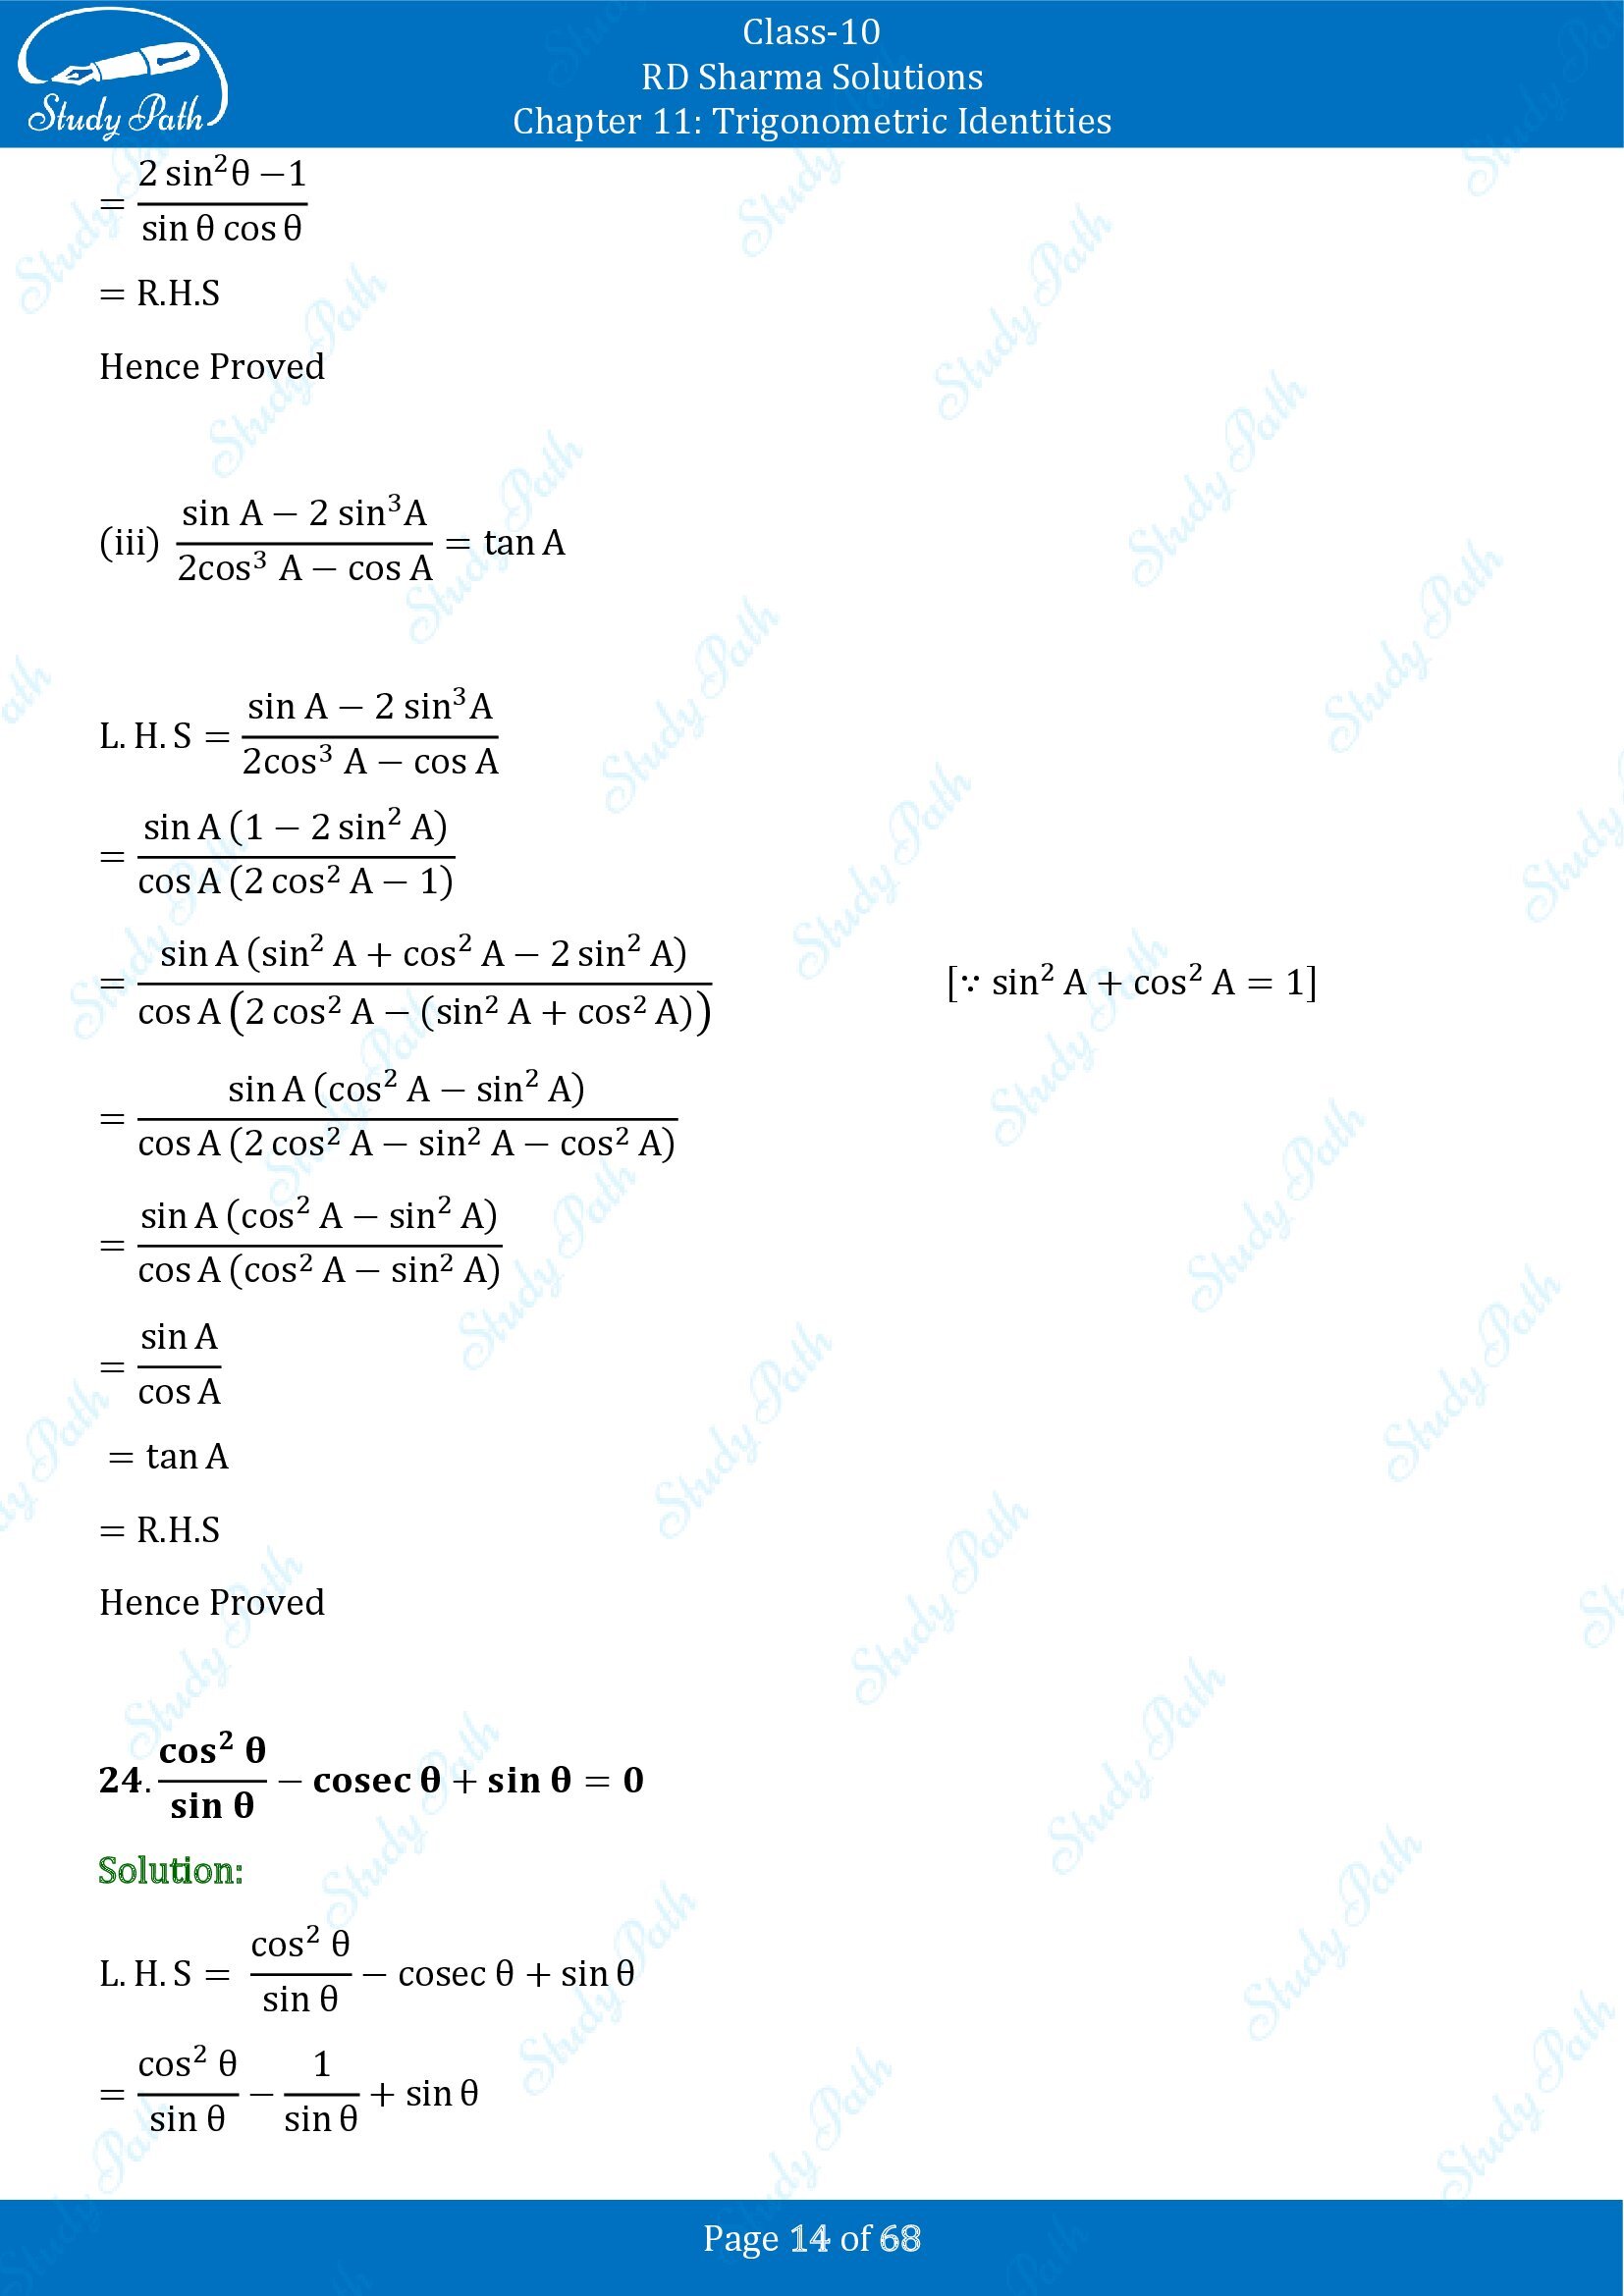 RD Sharma Solutions Class 10 Chapter 11 Trigonometric Identities Exercise 11.1 00014